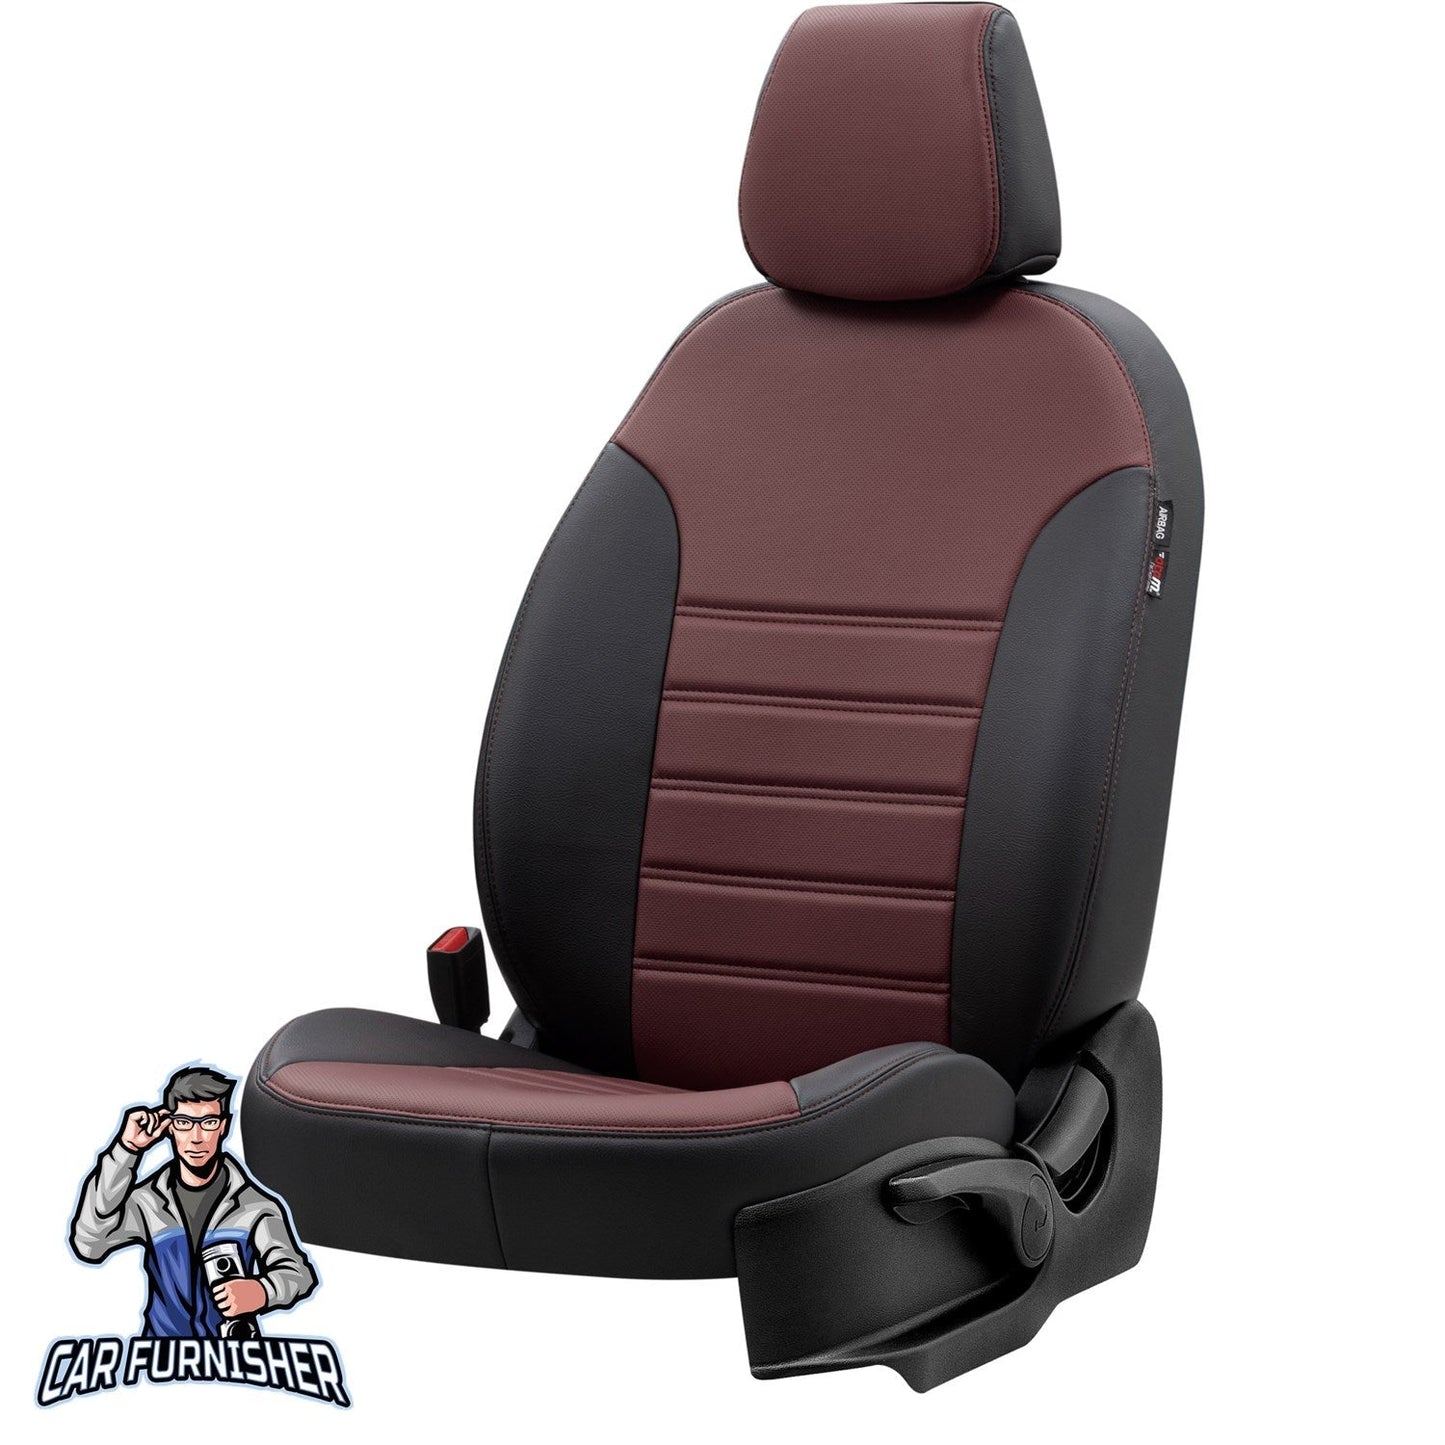 Mercedes Vaneo Seat Cover Istanbul Leather Design Burgundy Leather